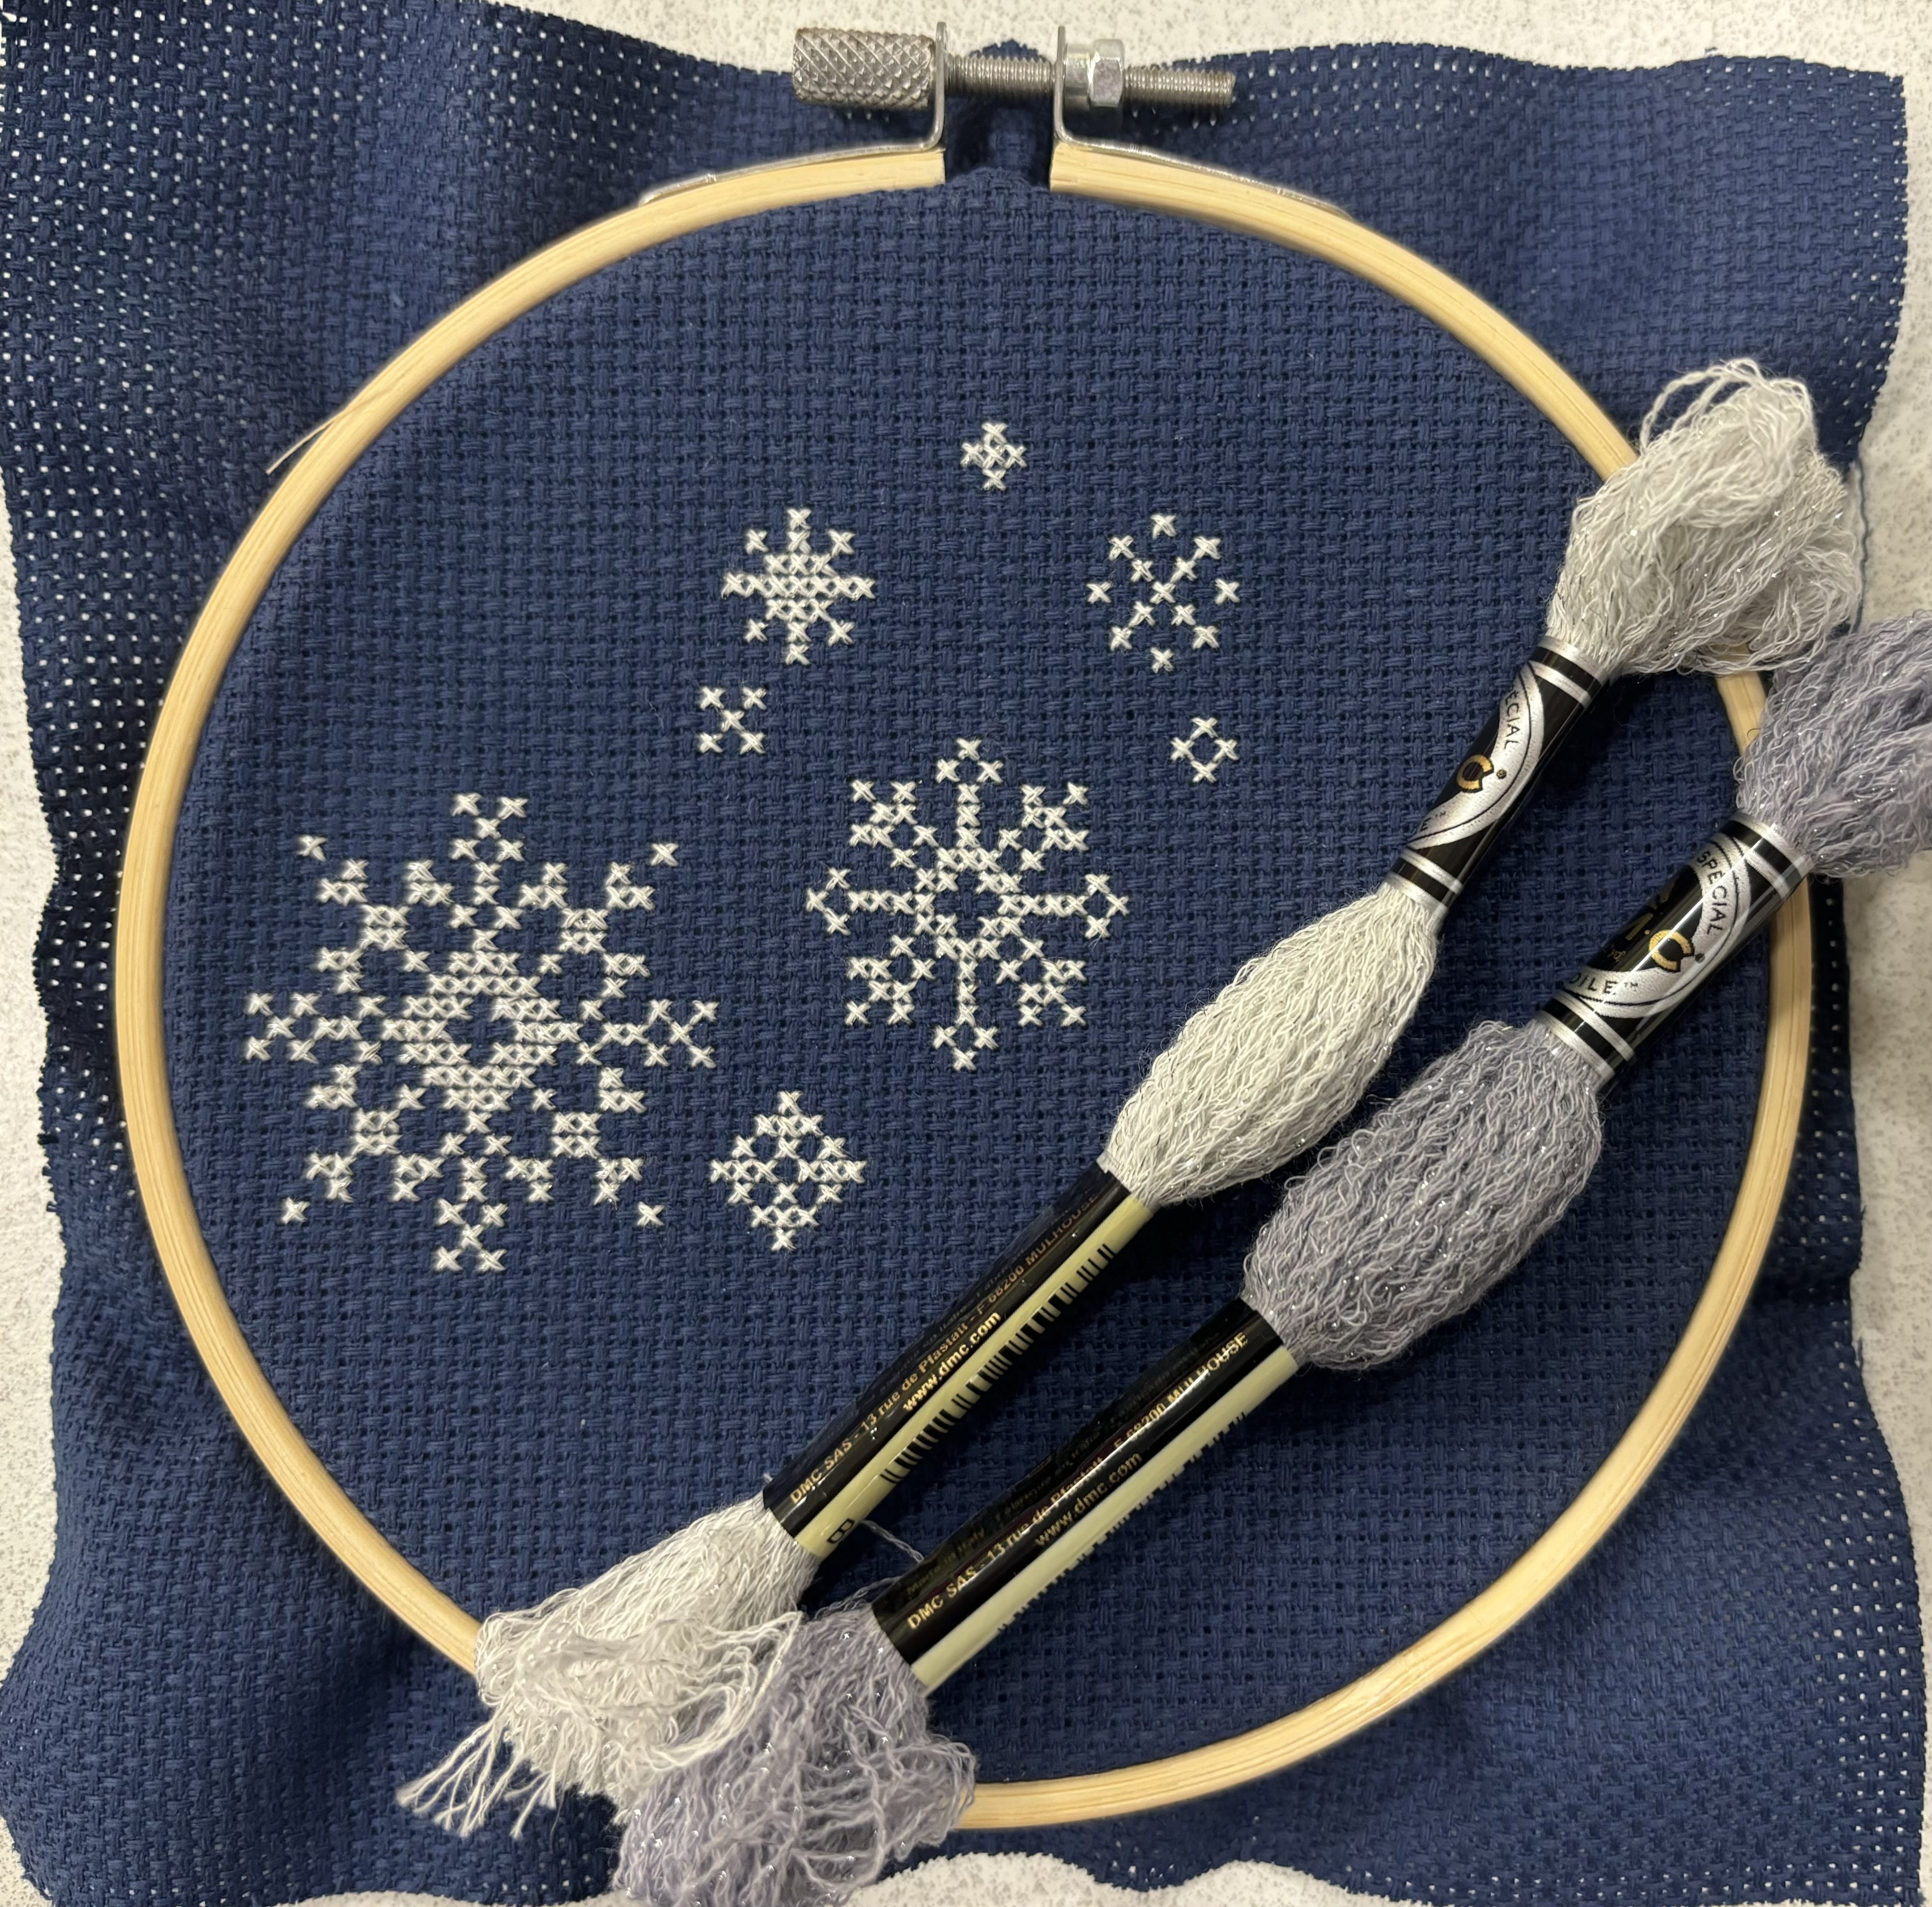 Dark blue 14 count aida in a wooden embroidery hoop. Seven white snowflakes are cross stitched on the fabric. One white skein and one gray skein of embroidery floss sit on top of the fabric and hoop.